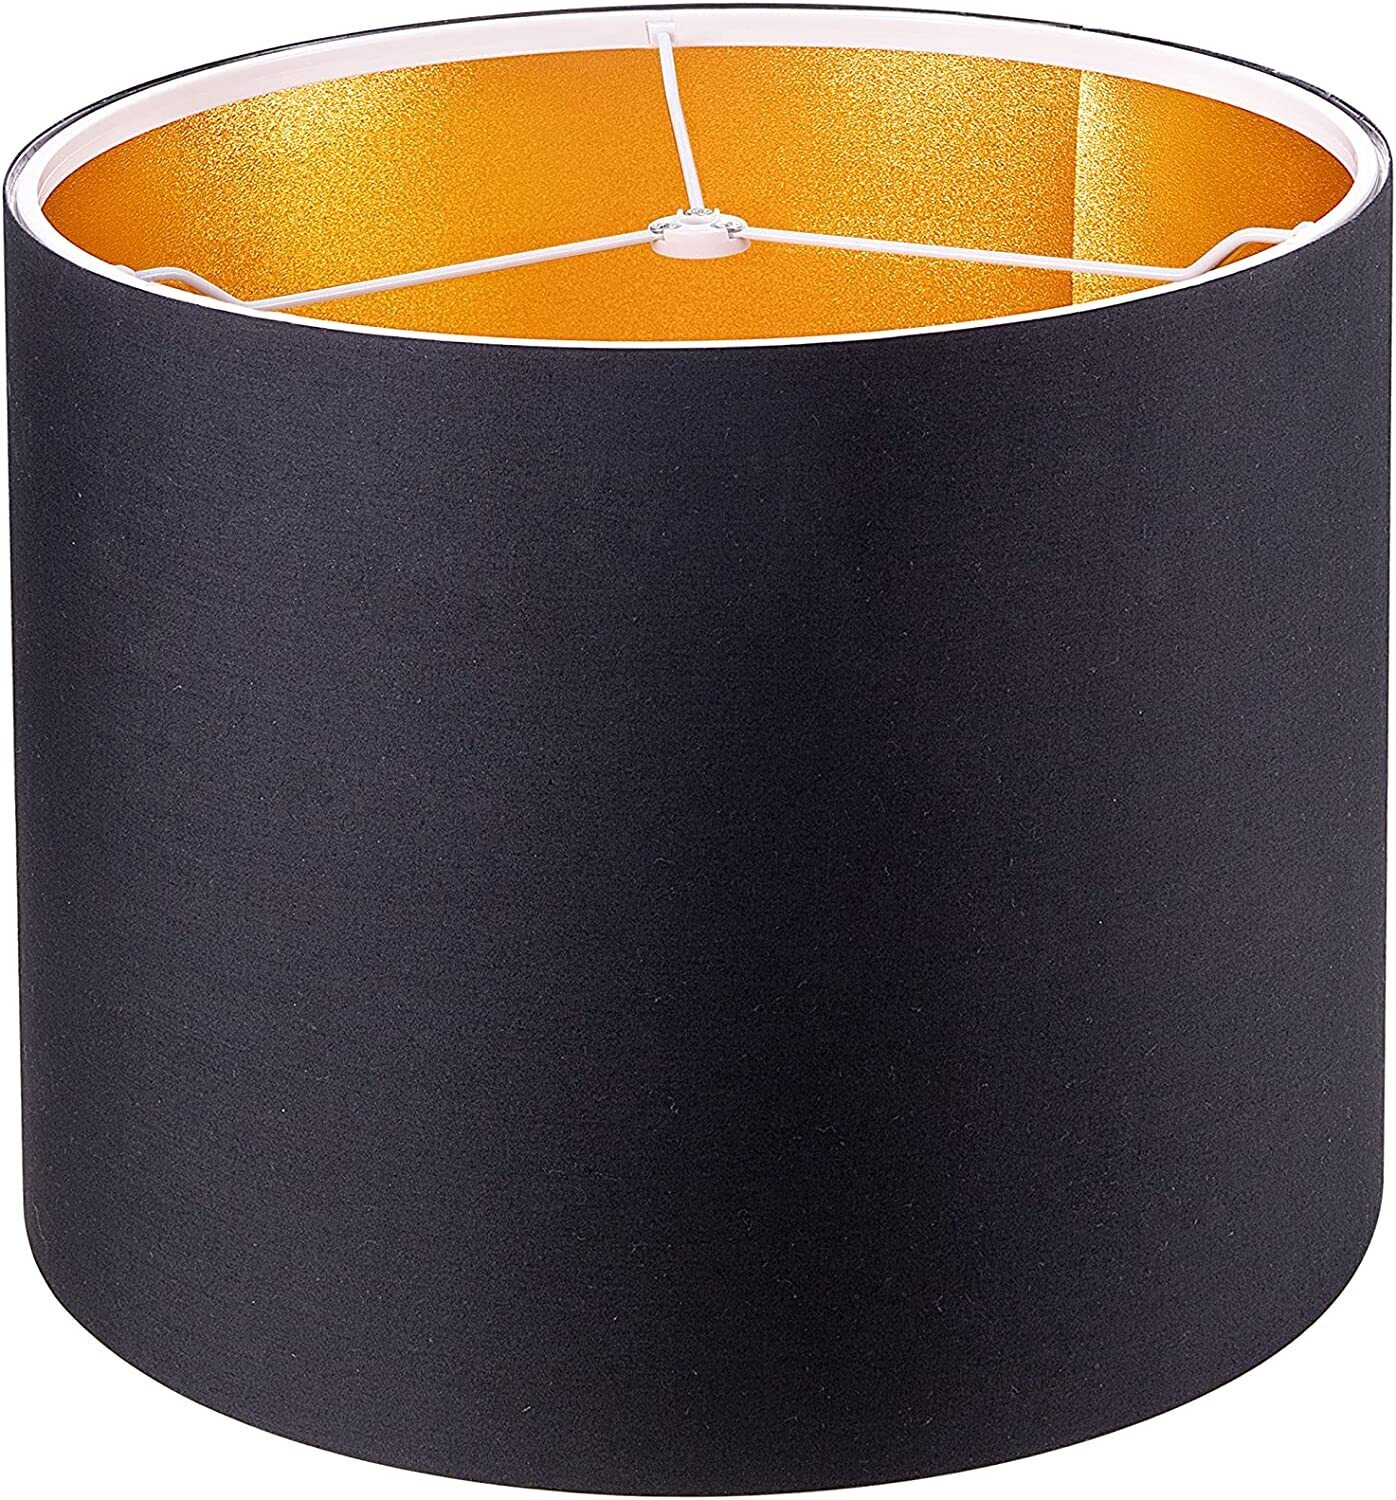 Glimmer Black Lamp Shade with Gold Lining